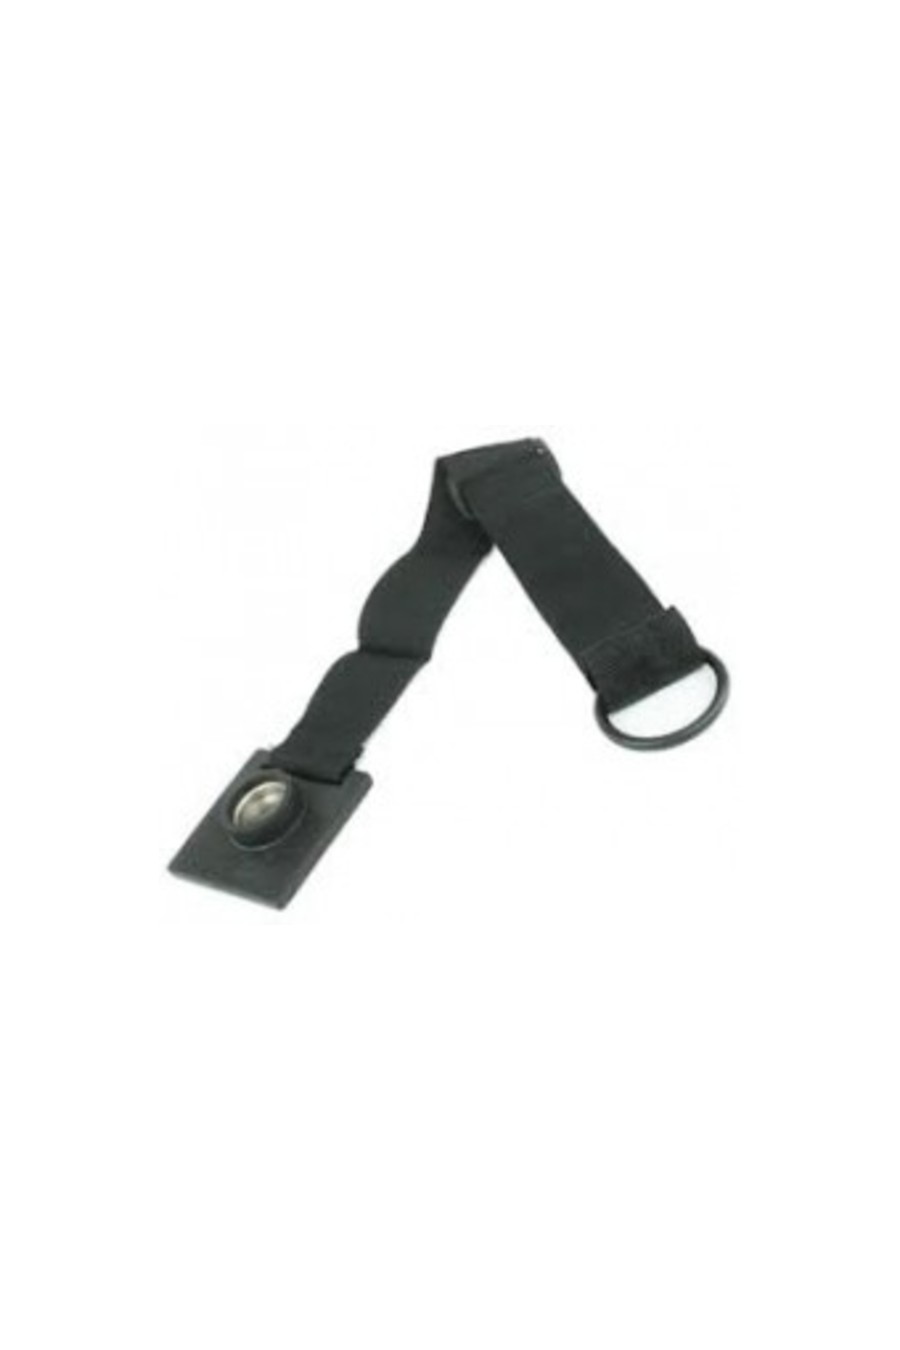 Square Rubber End Pin Stopper